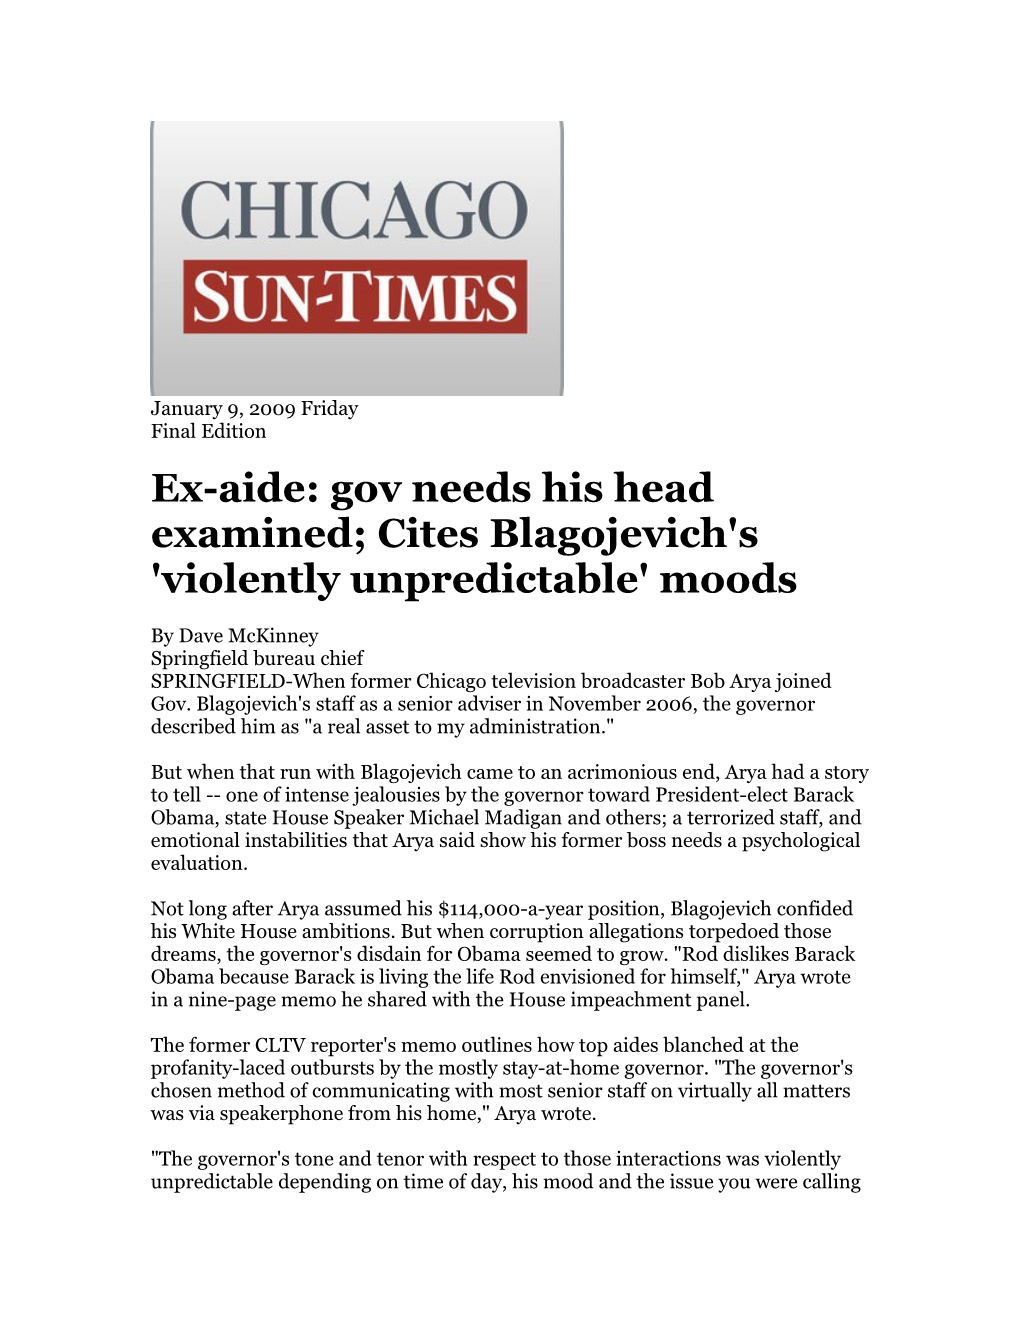 Ex-Aide: Gov Needs His Head Examined; Cites Blagojevich's 'Violently Unpredictable' Moods